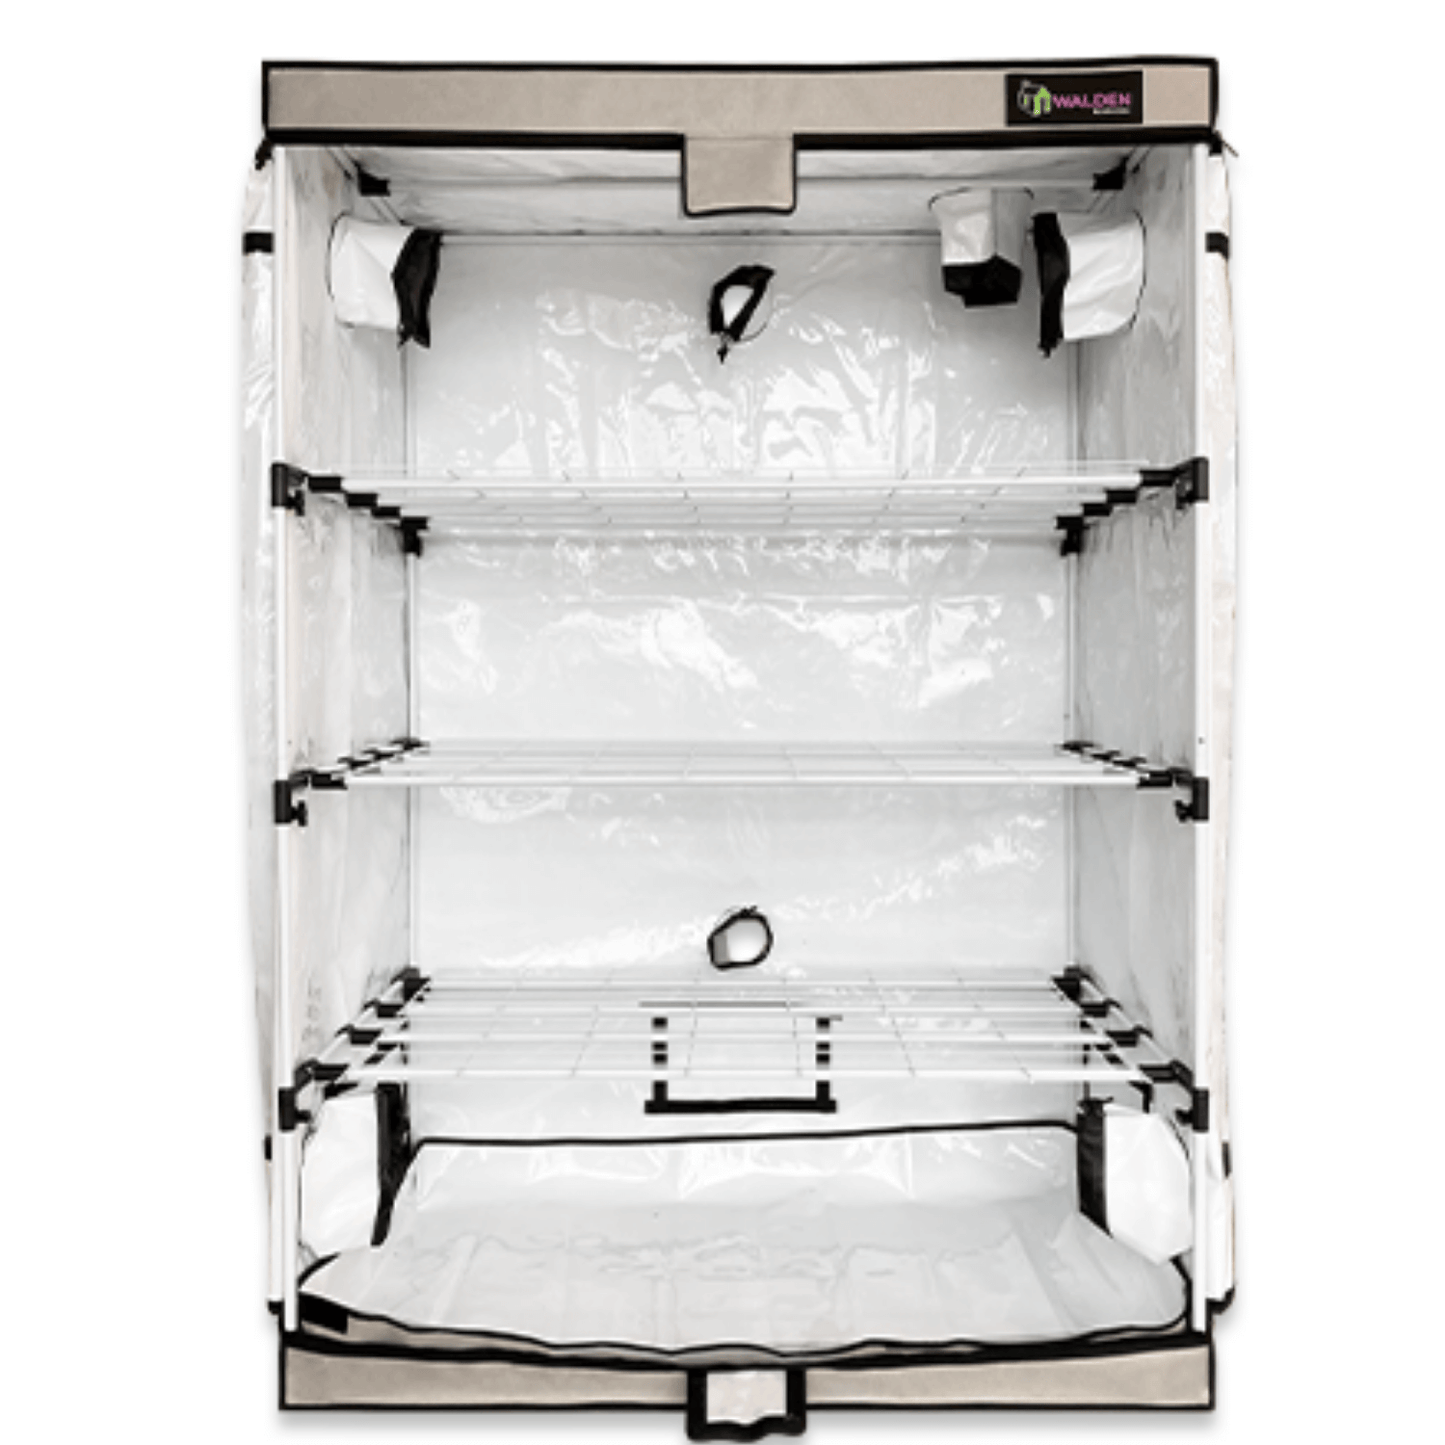 Active Grow Seed Starting 2' x 4' 3-Tier LED Walden White Grow Tent Kit | AG/24TENT/W/3S/SK | Grow Tents Depot | Grow Tent Kits | 769947348179